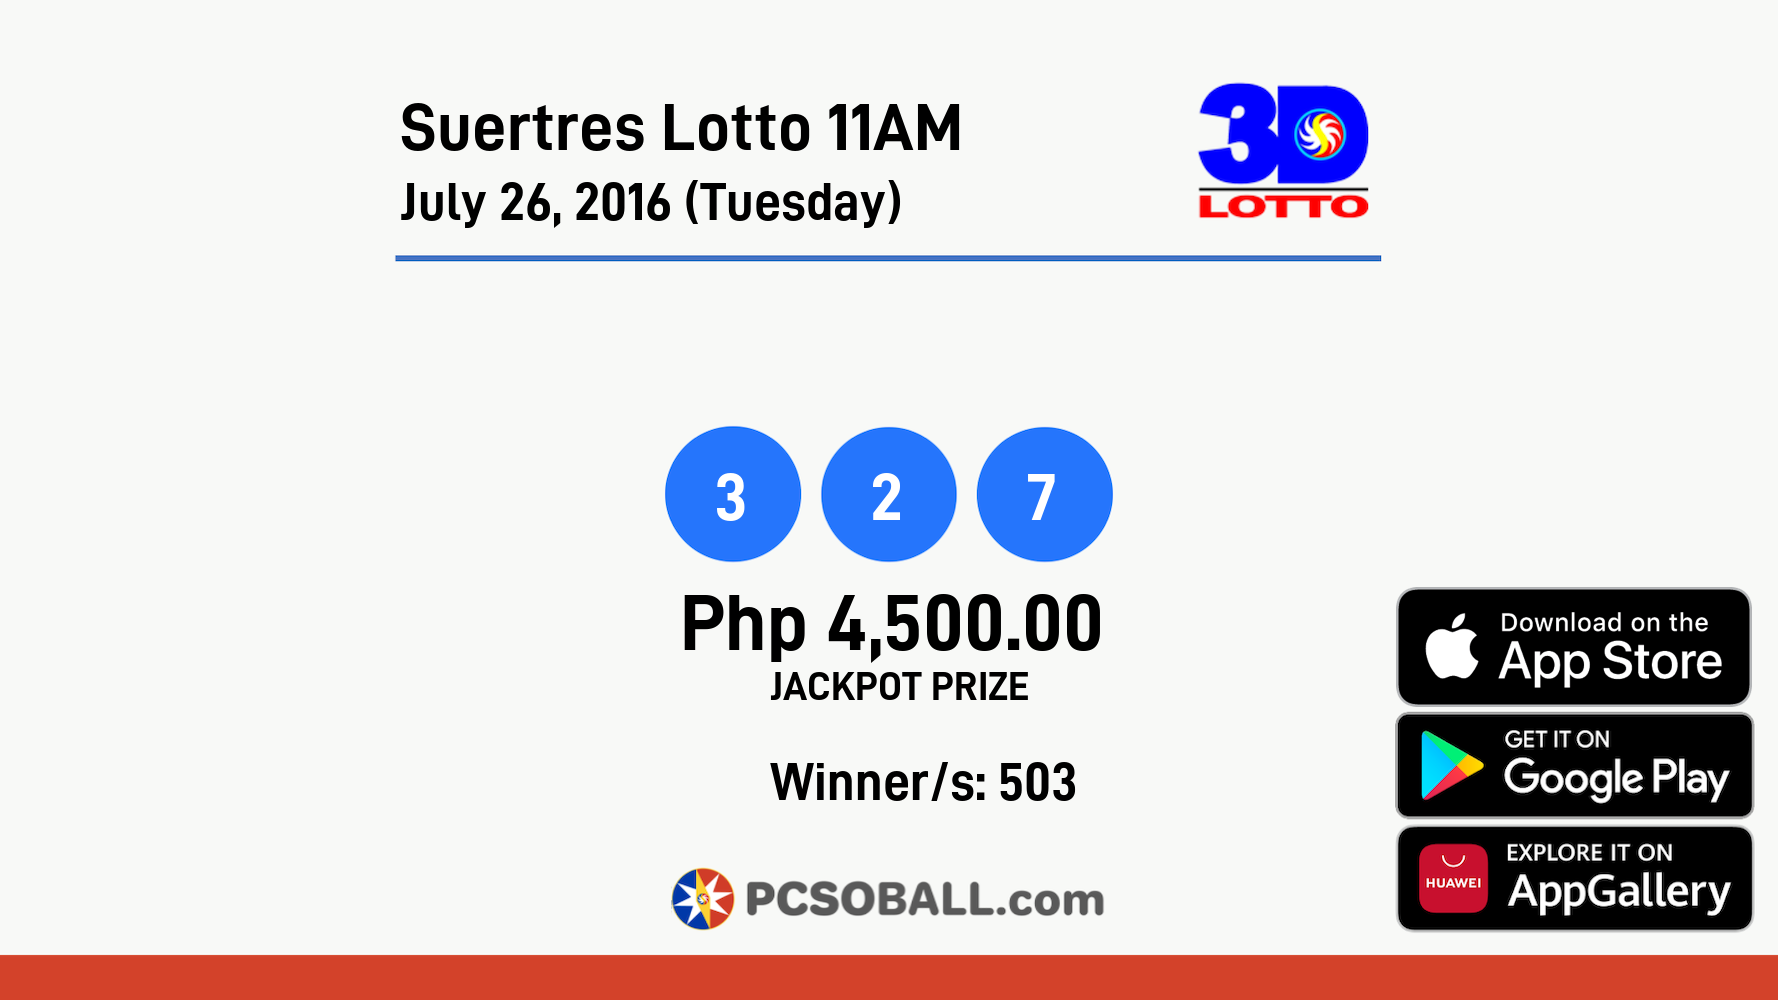 Suertres Lotto 11AM July 26, 2016 (Tuesday) Result